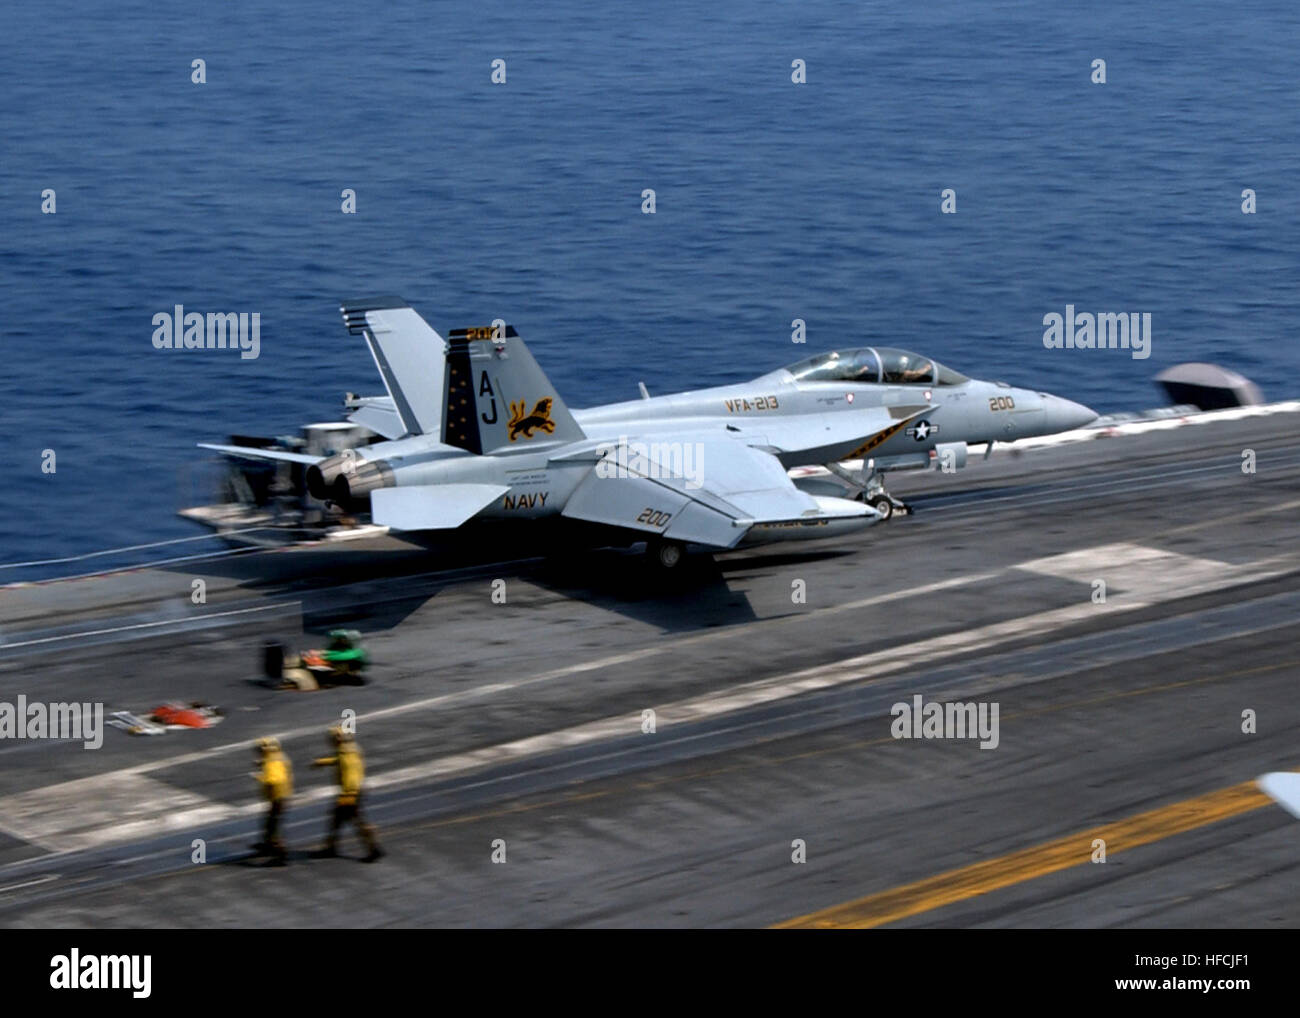 An F/A-18E Super Hornet assigned to the 'Blacklions' of Strike Fighter Squadron 213 launches from the flight deck of the Nimitz-class aircraft carrier USS Theodore Roosevelt. The Theodore Roosevelt Carrier Strike Group is participating in Joint Task Force Exercise 'Operation Brimstone' off the Atlantic coast. On the edge of launching 105534 Stock Photo